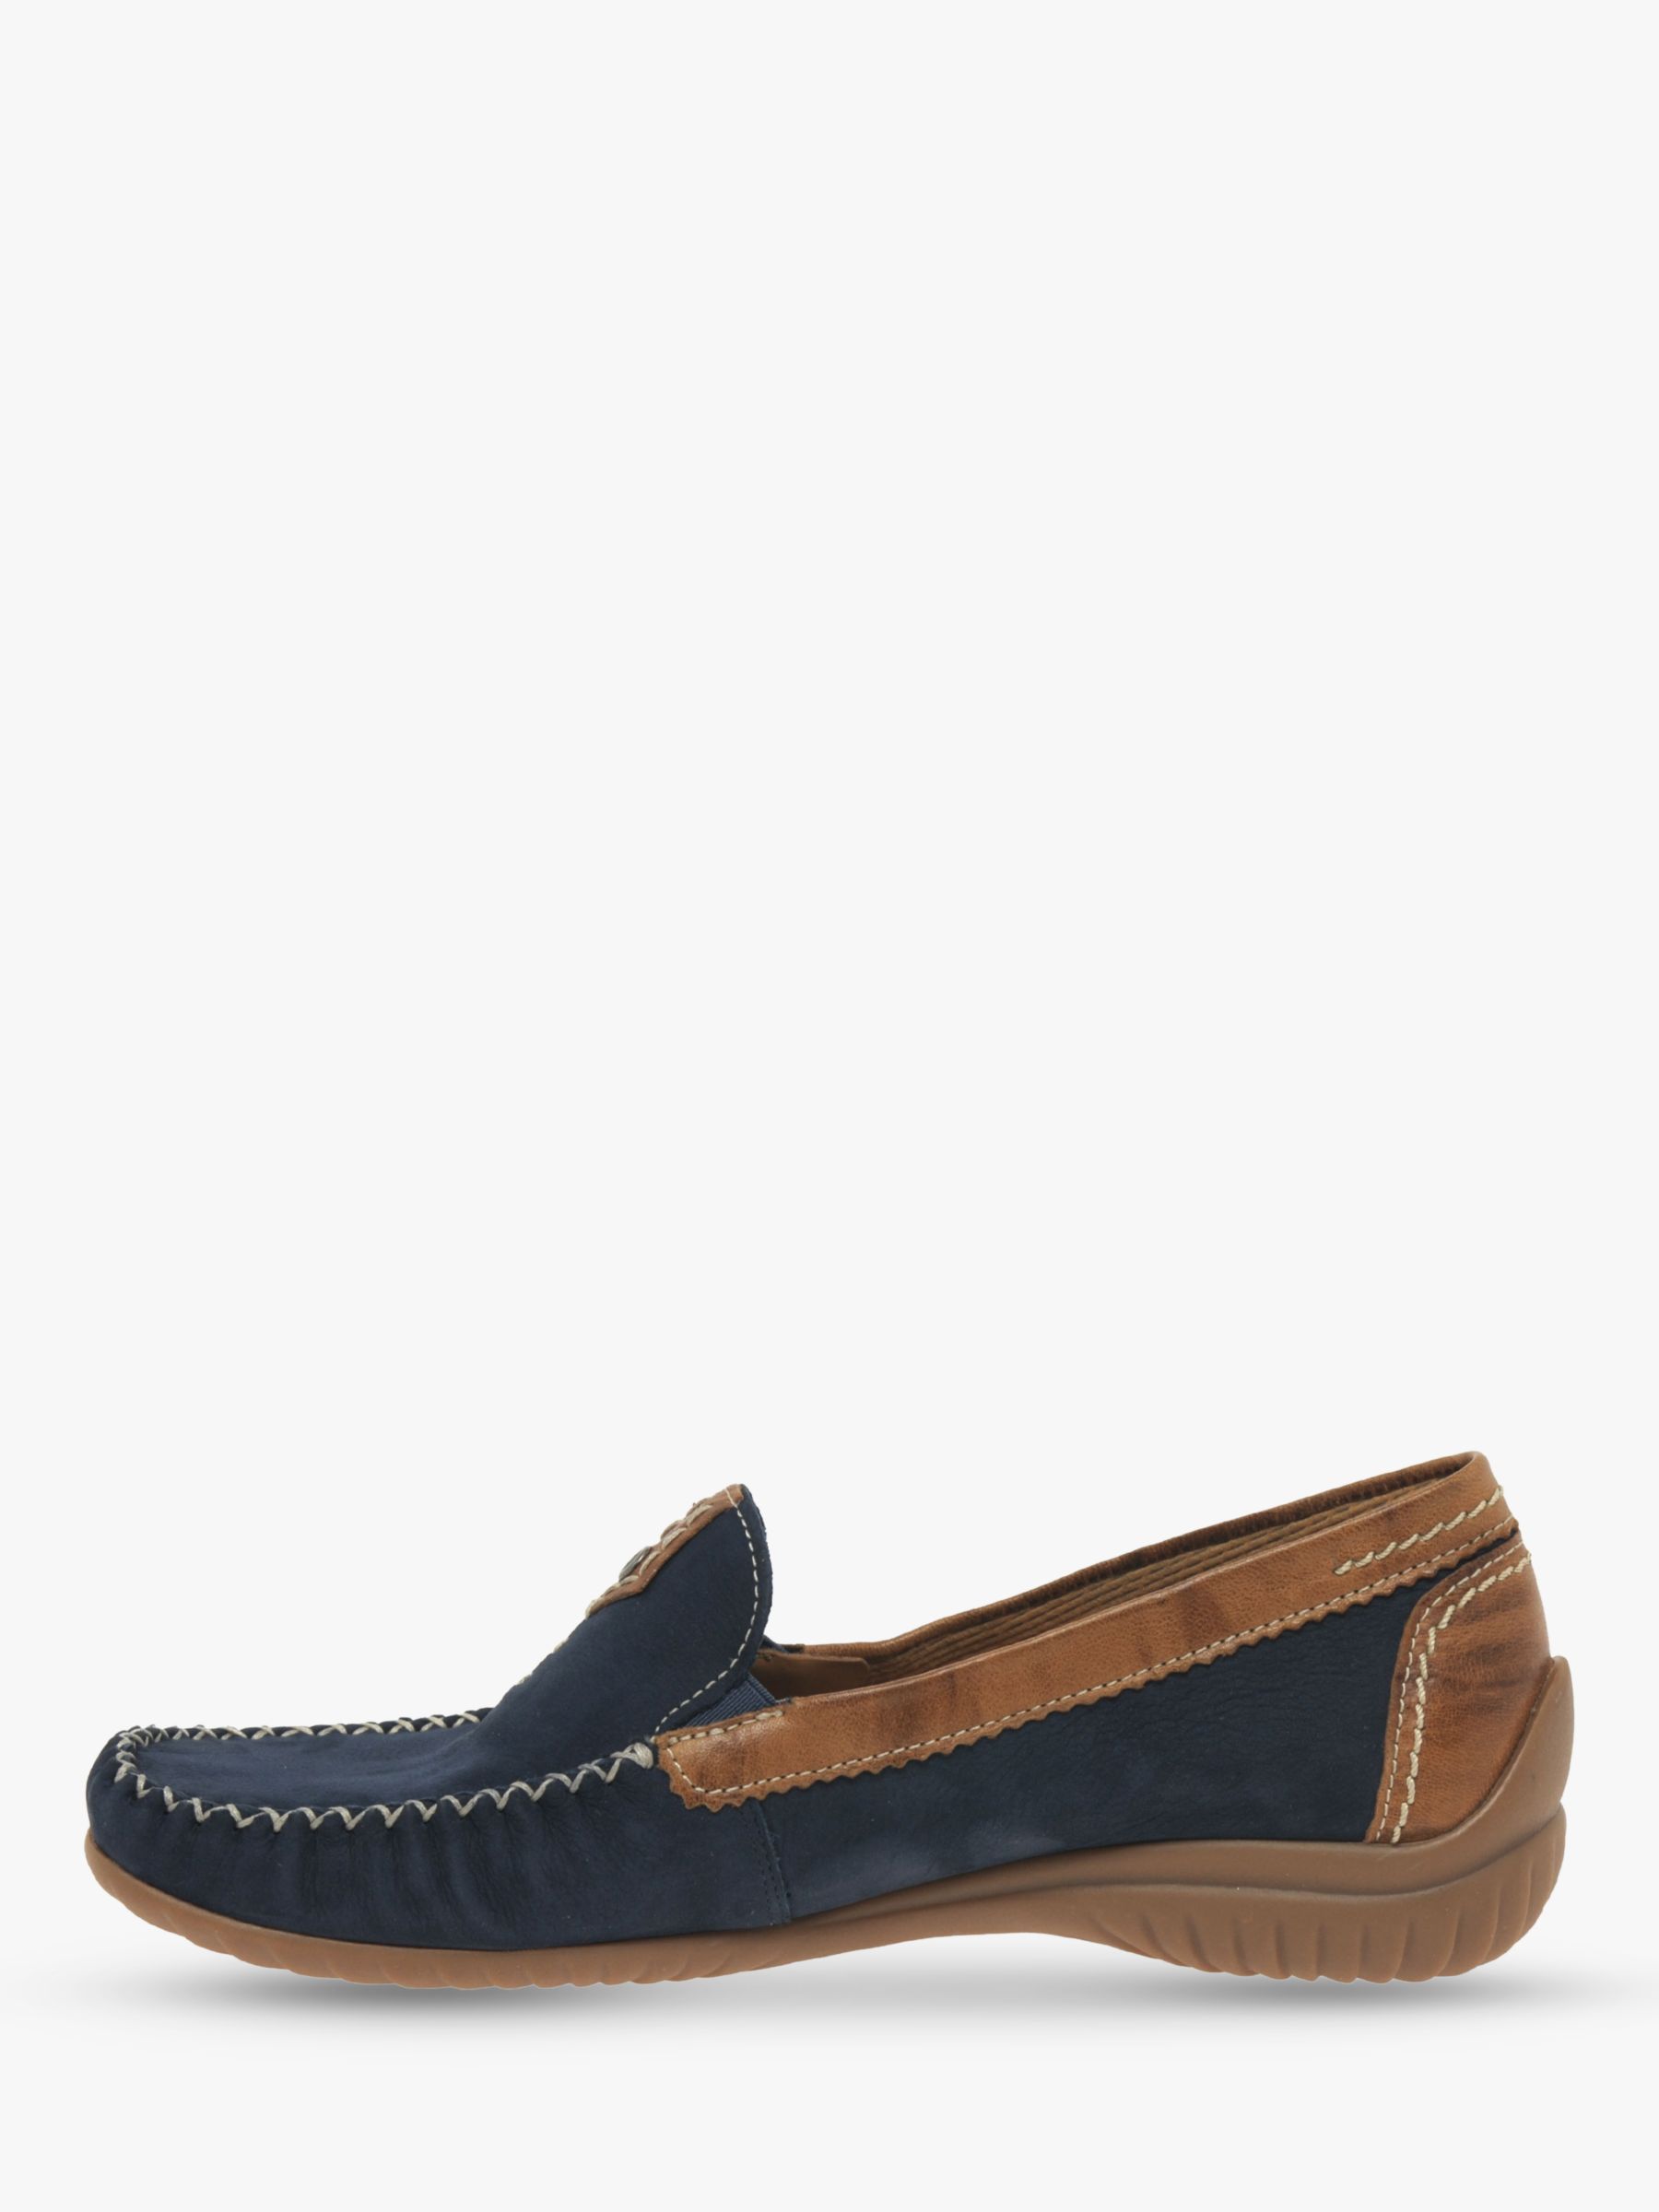 Buy Gabor California Wide Fit Moccasins, Navy Online at johnlewis.com